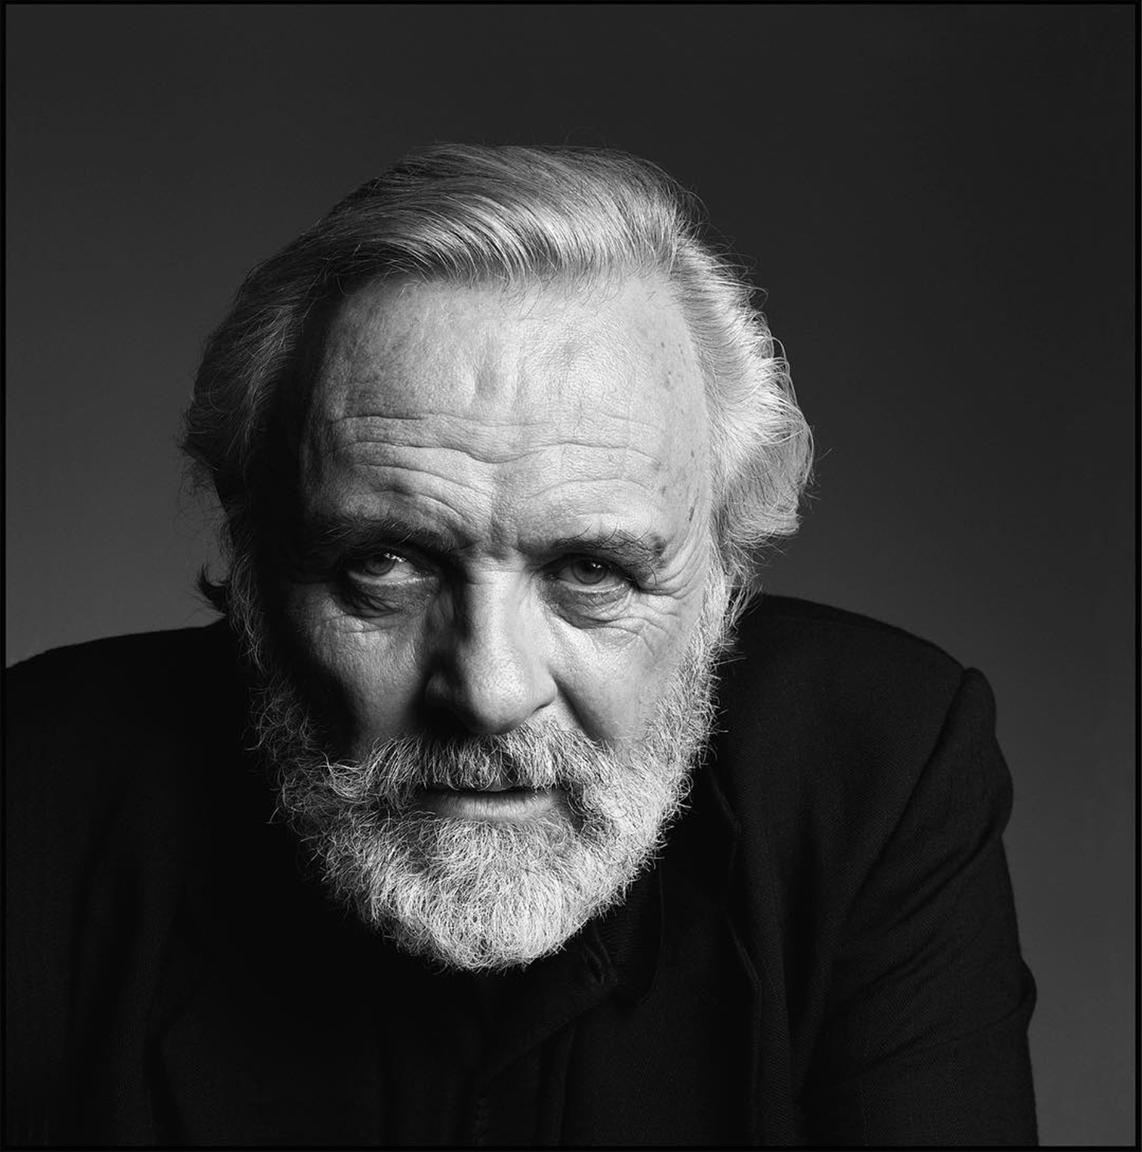 Anthony Hopkins, 1998 - Photograph by Patrick Demarchelier